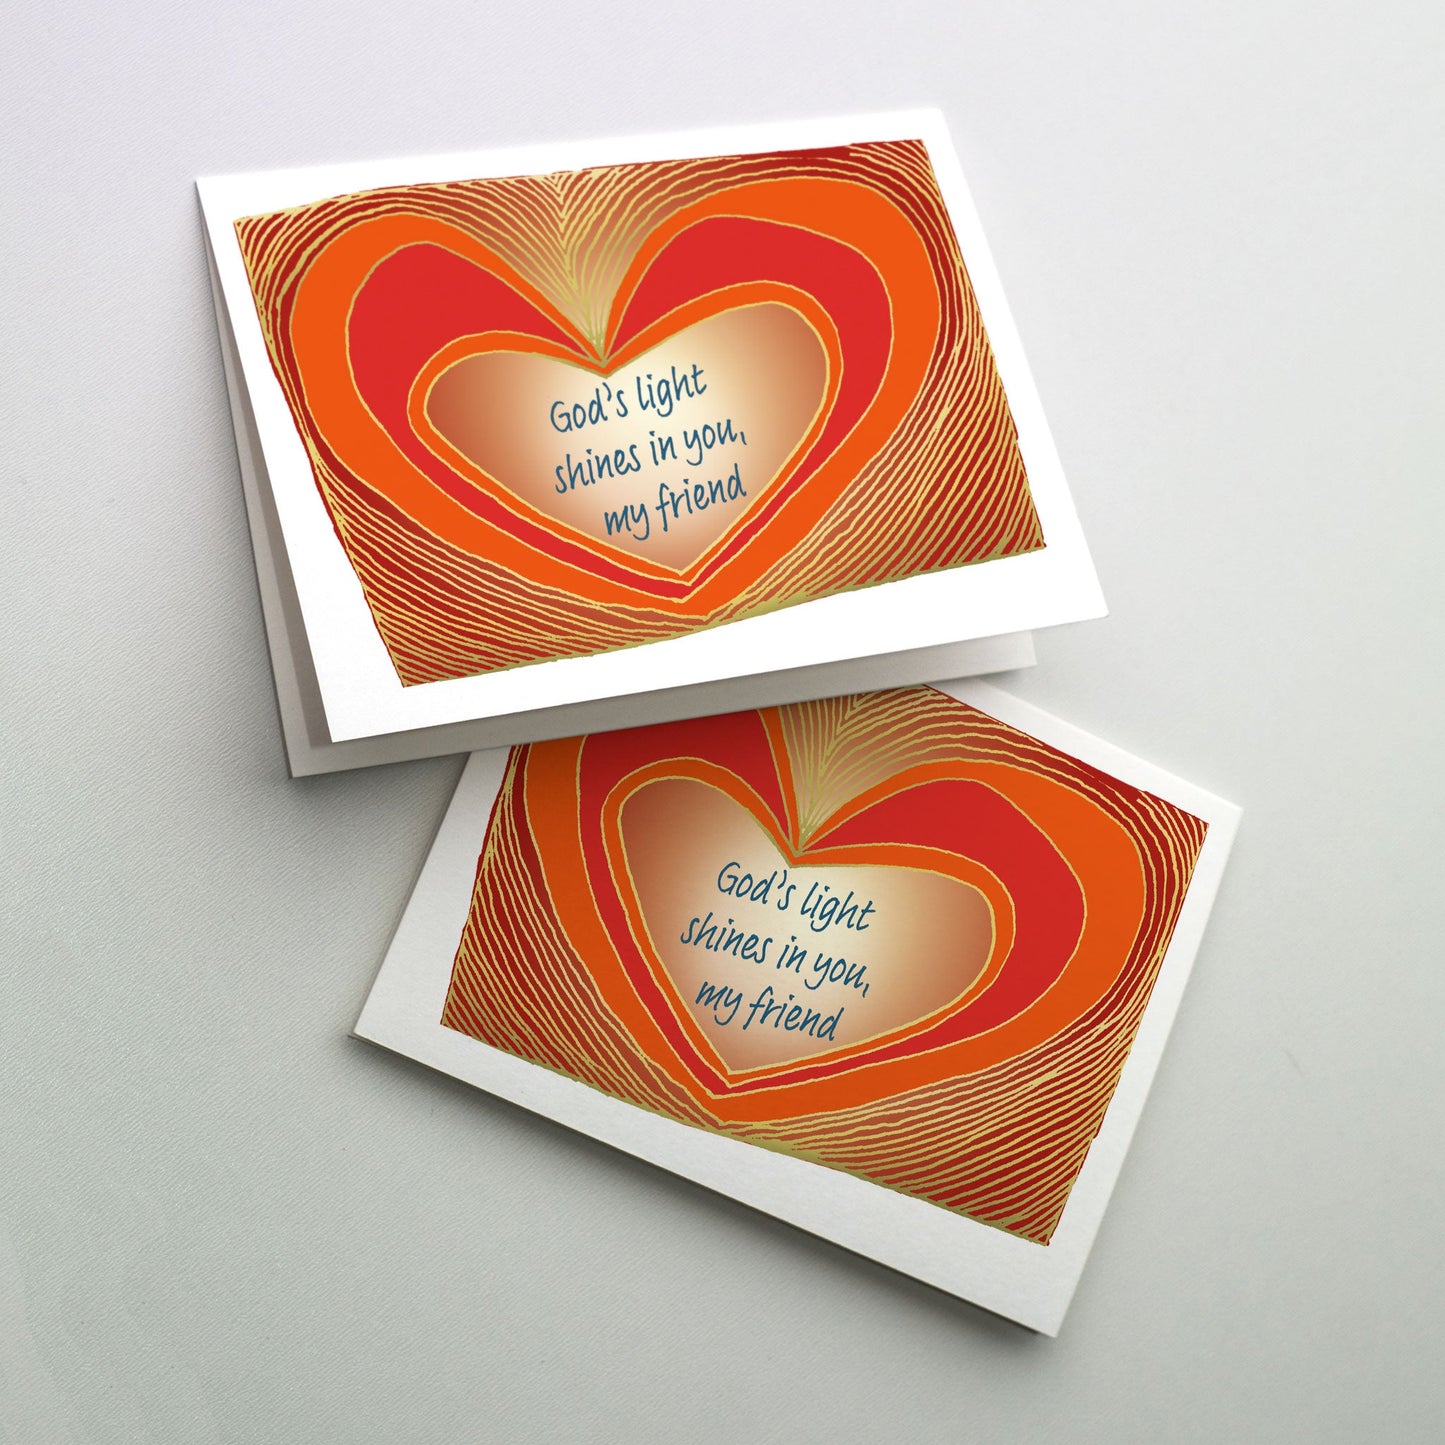 Red hearts with metallic gold linework framing center message